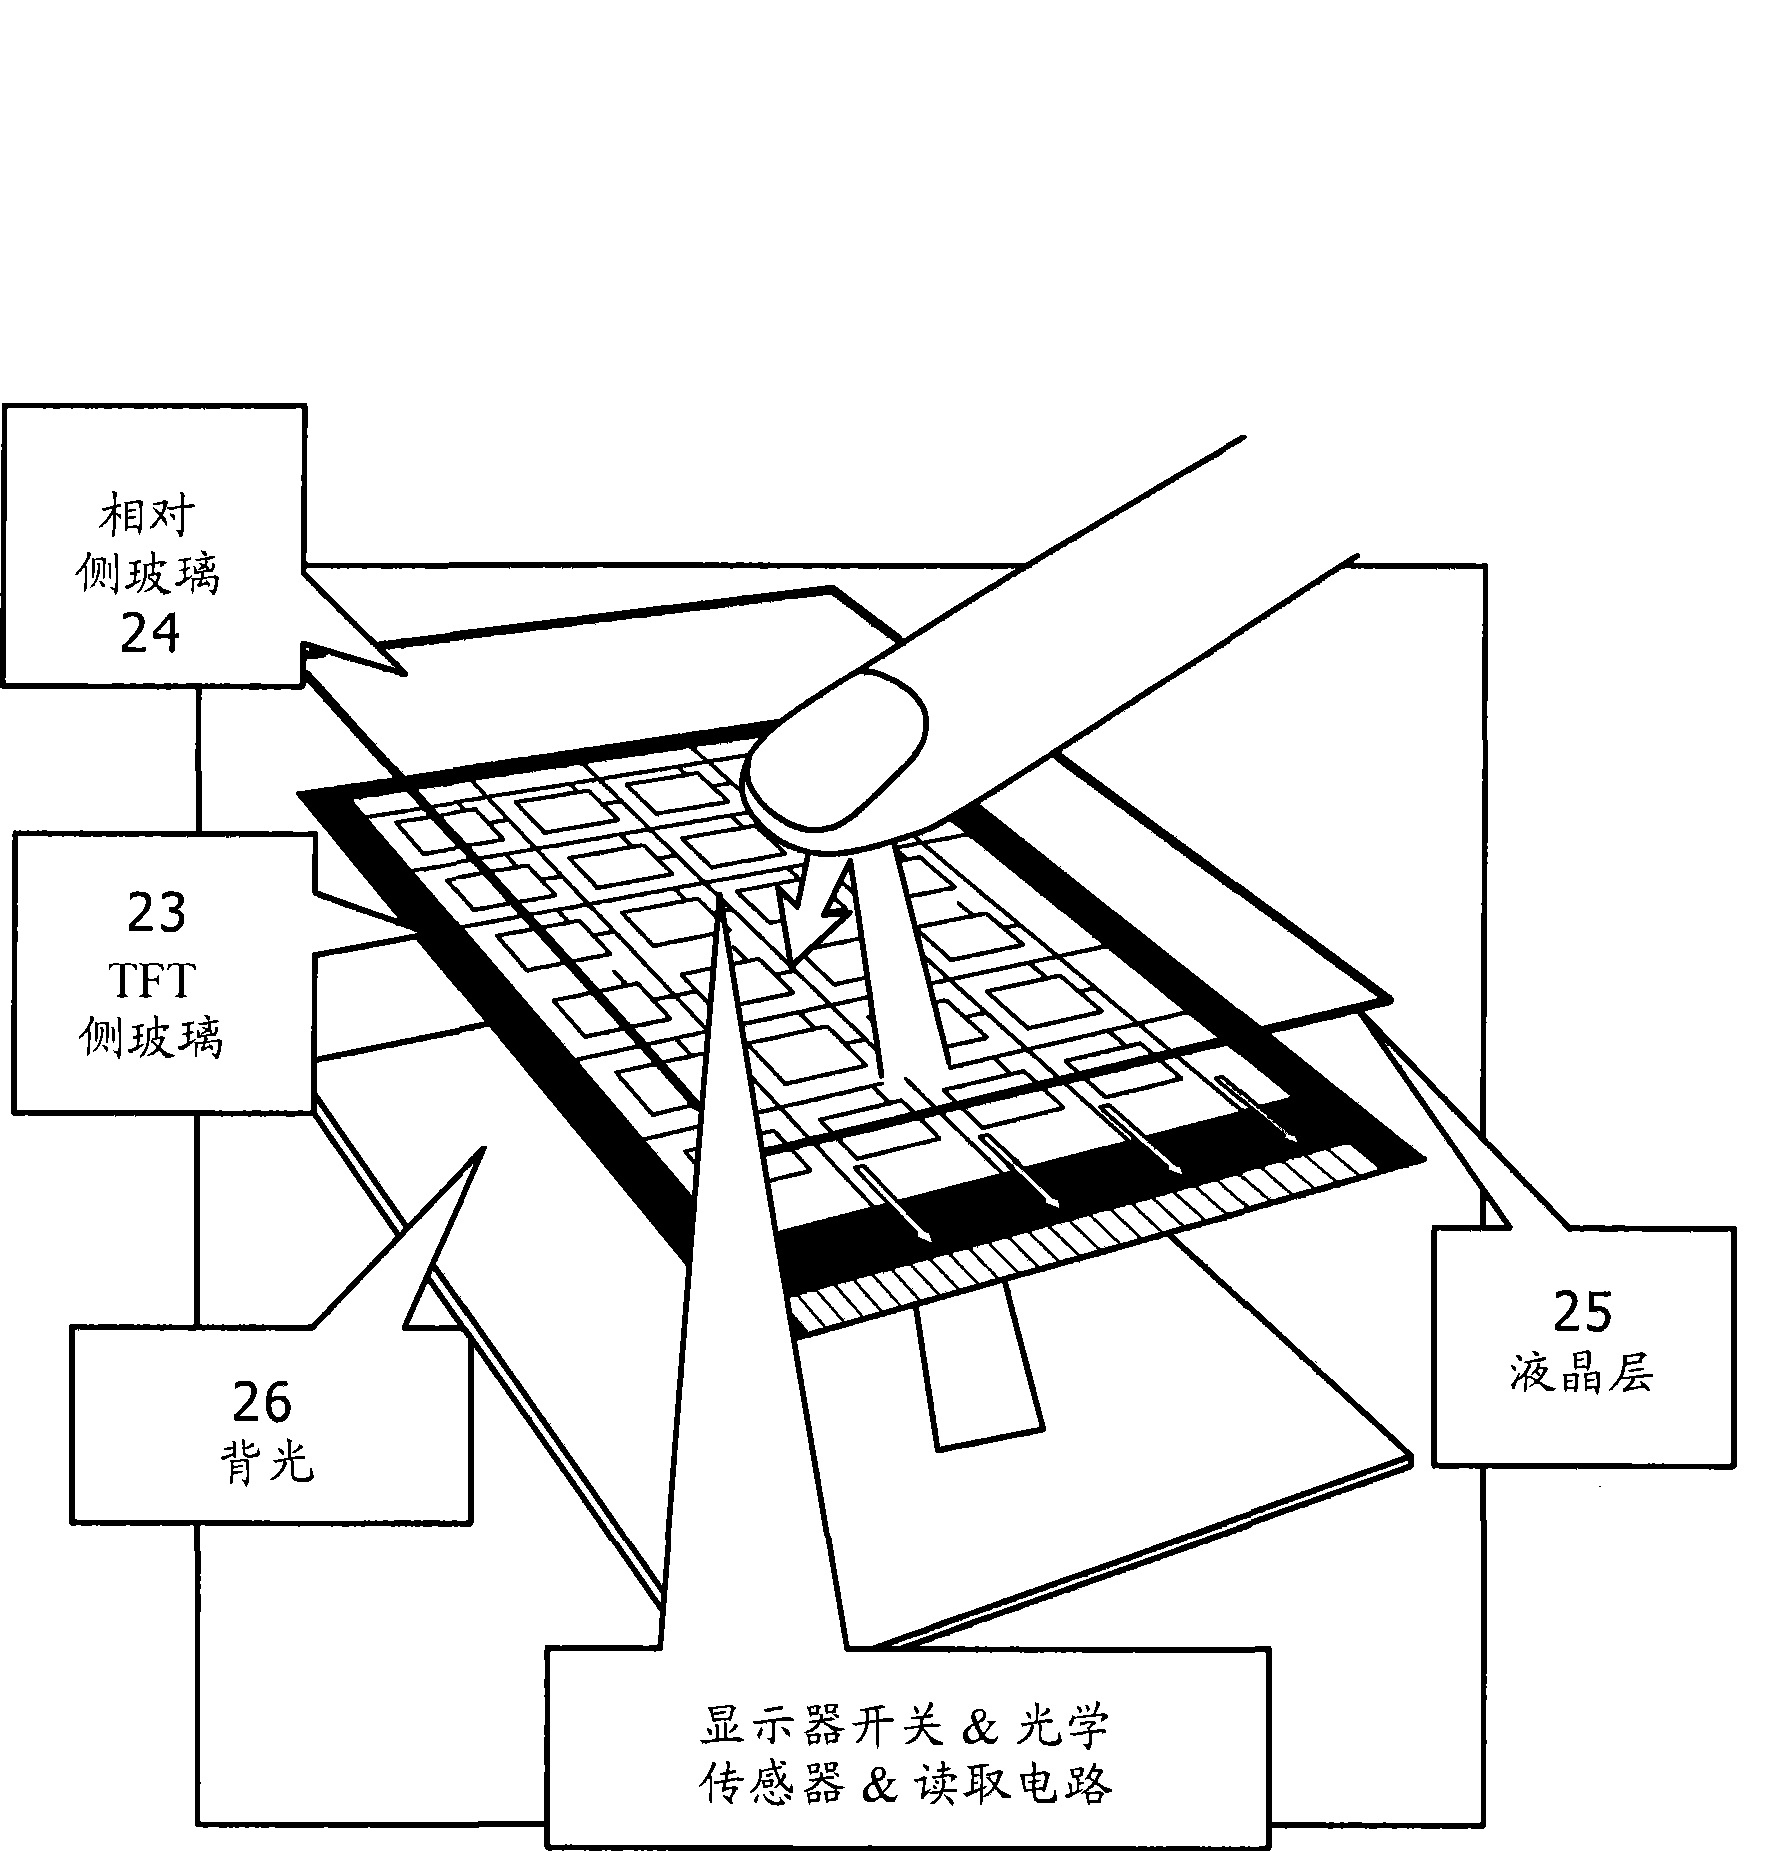 Display and electronic apparatus